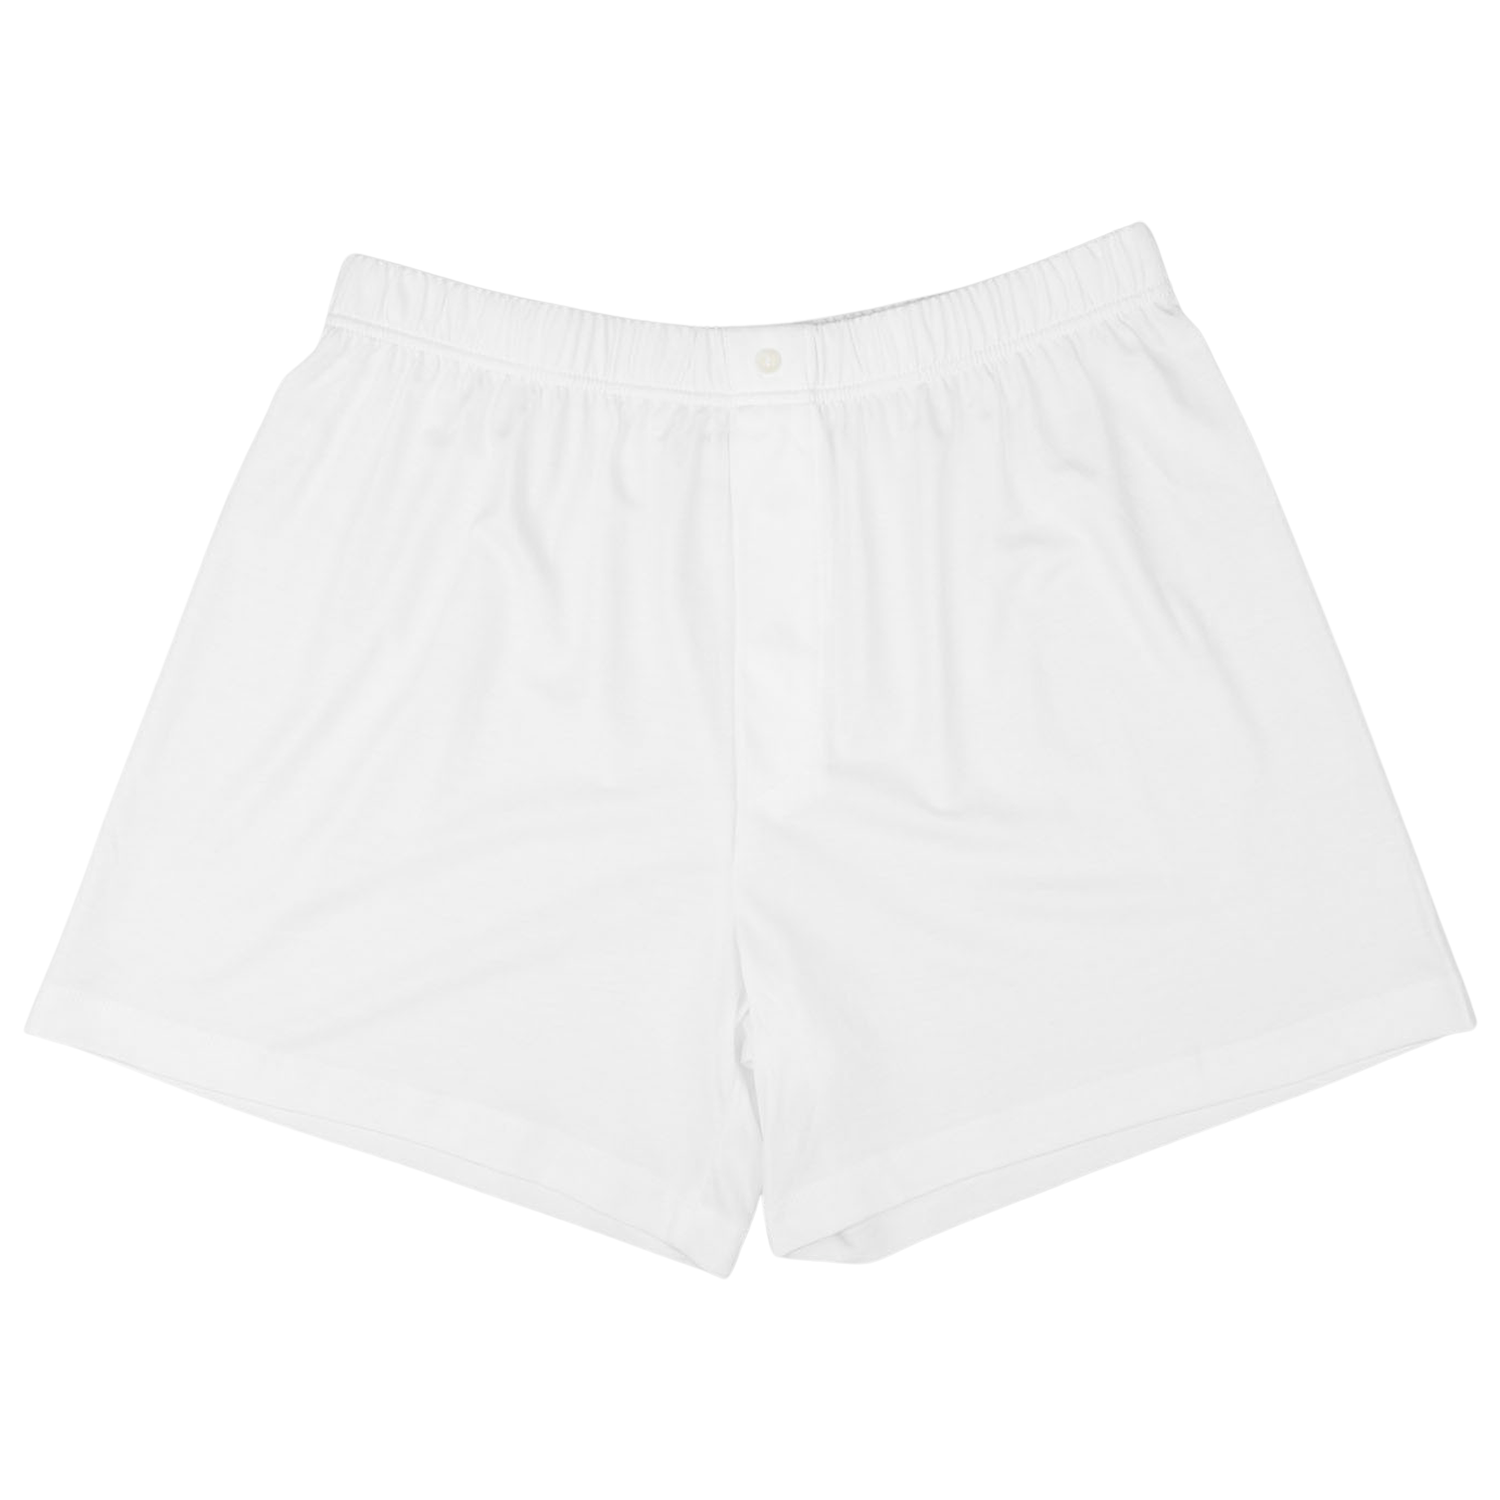 A pair of White Lyocell Cotton Henner Boxers from The White Briefs with an elastic waistband and front button closure, made from a soft lyocell-cotton blend for ultimate comfort.